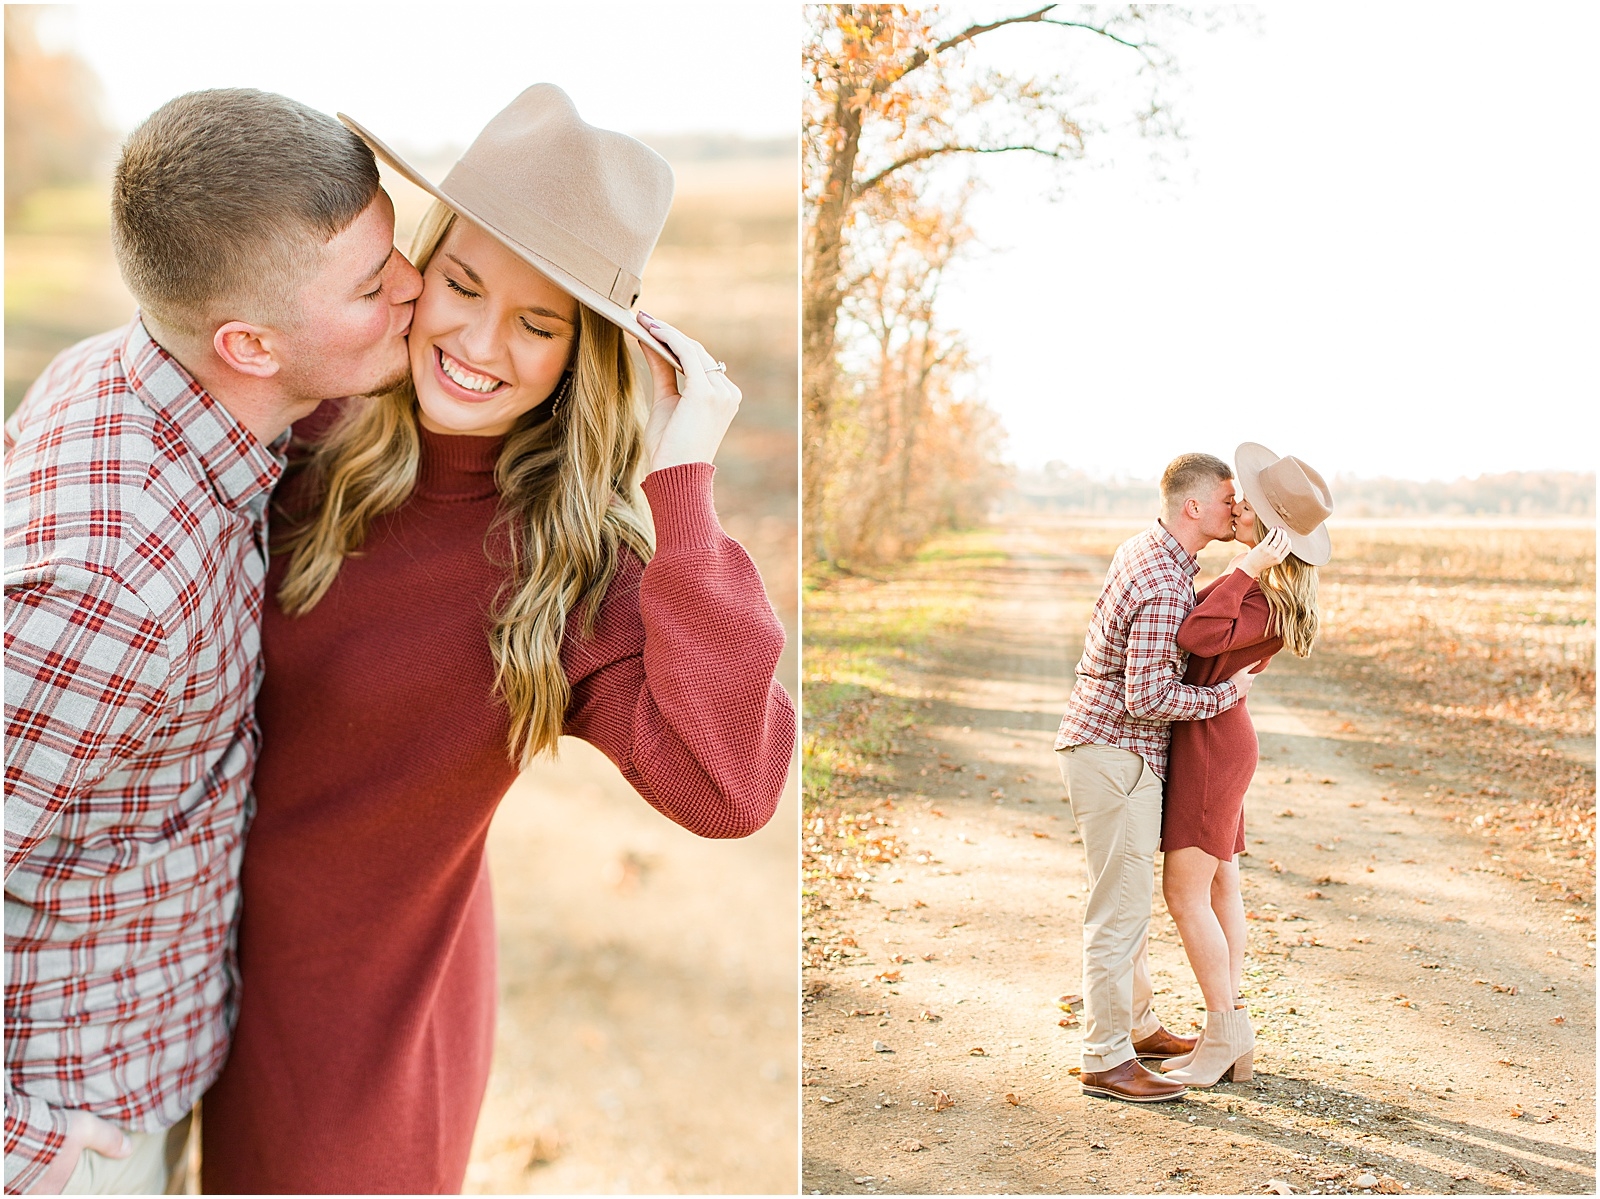 A Fall Southern Indiana Engagement Seesion | Cody and Hannah | Bret and Brandie Photography 011.jpg